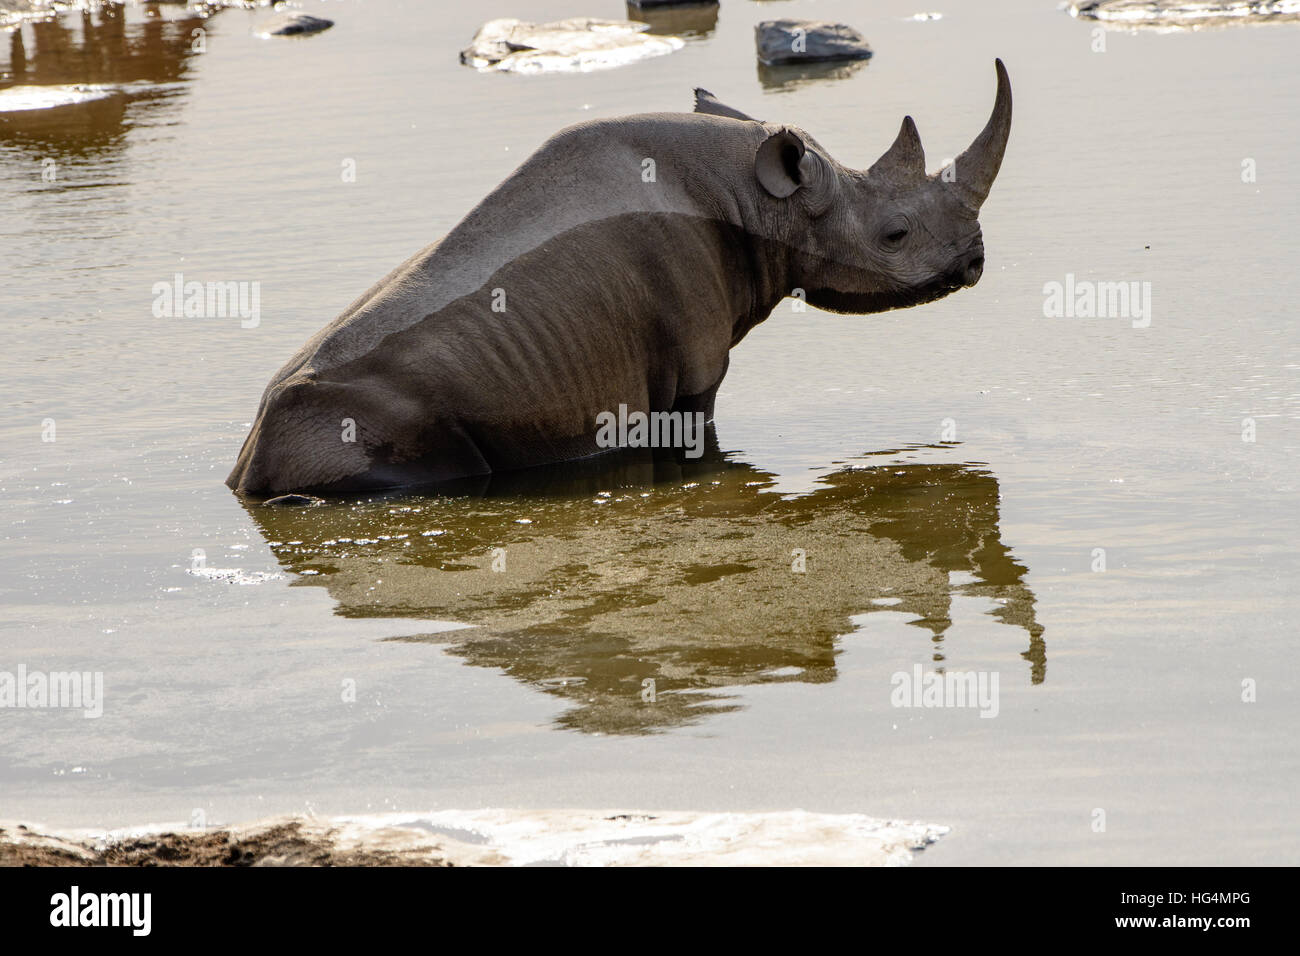 Black rhino and its reflection sitting in the waters of the waterhole Stock Photo